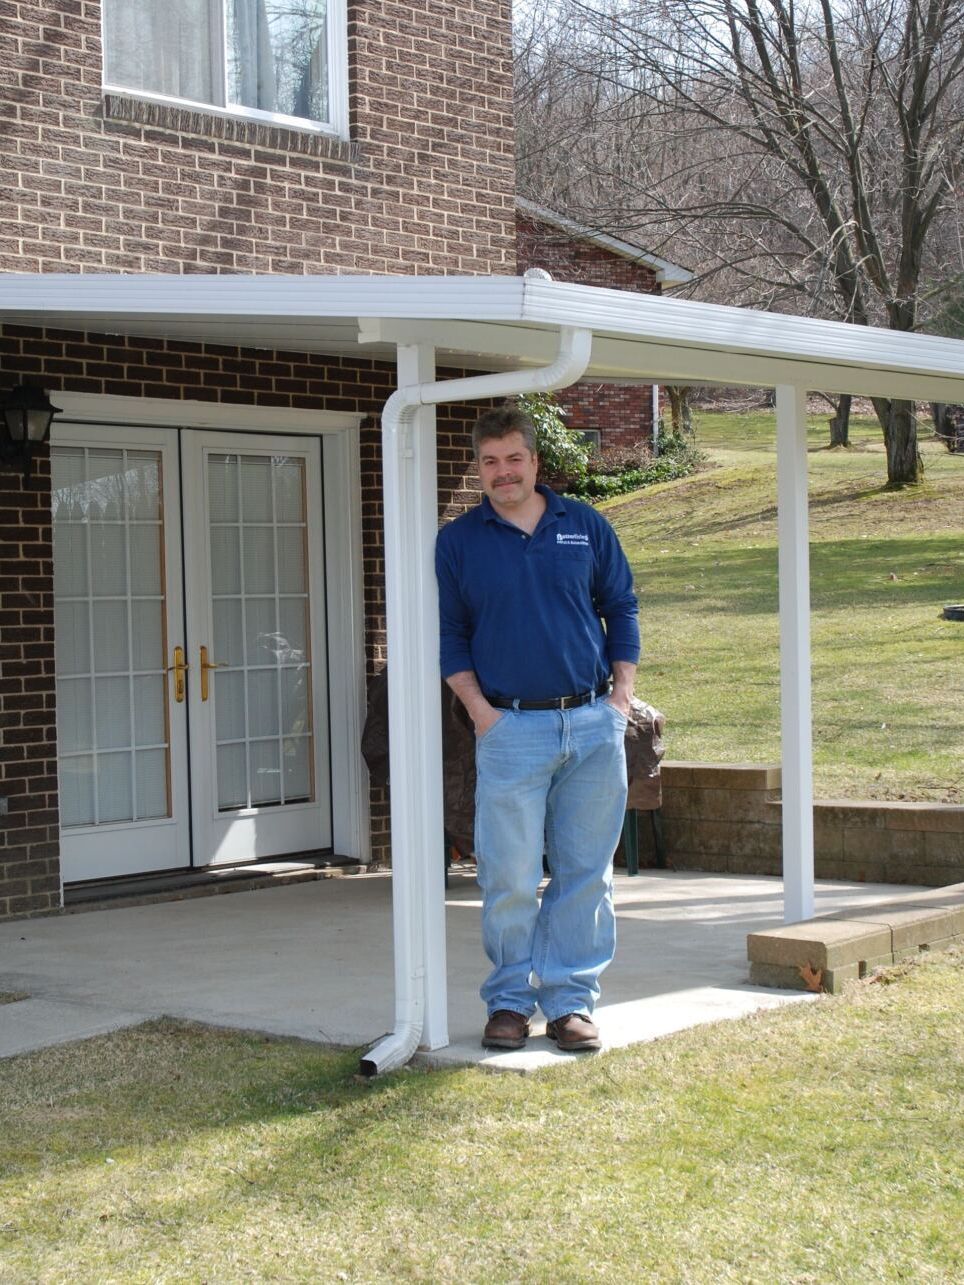 A man in a blue shirt is standing on a porch